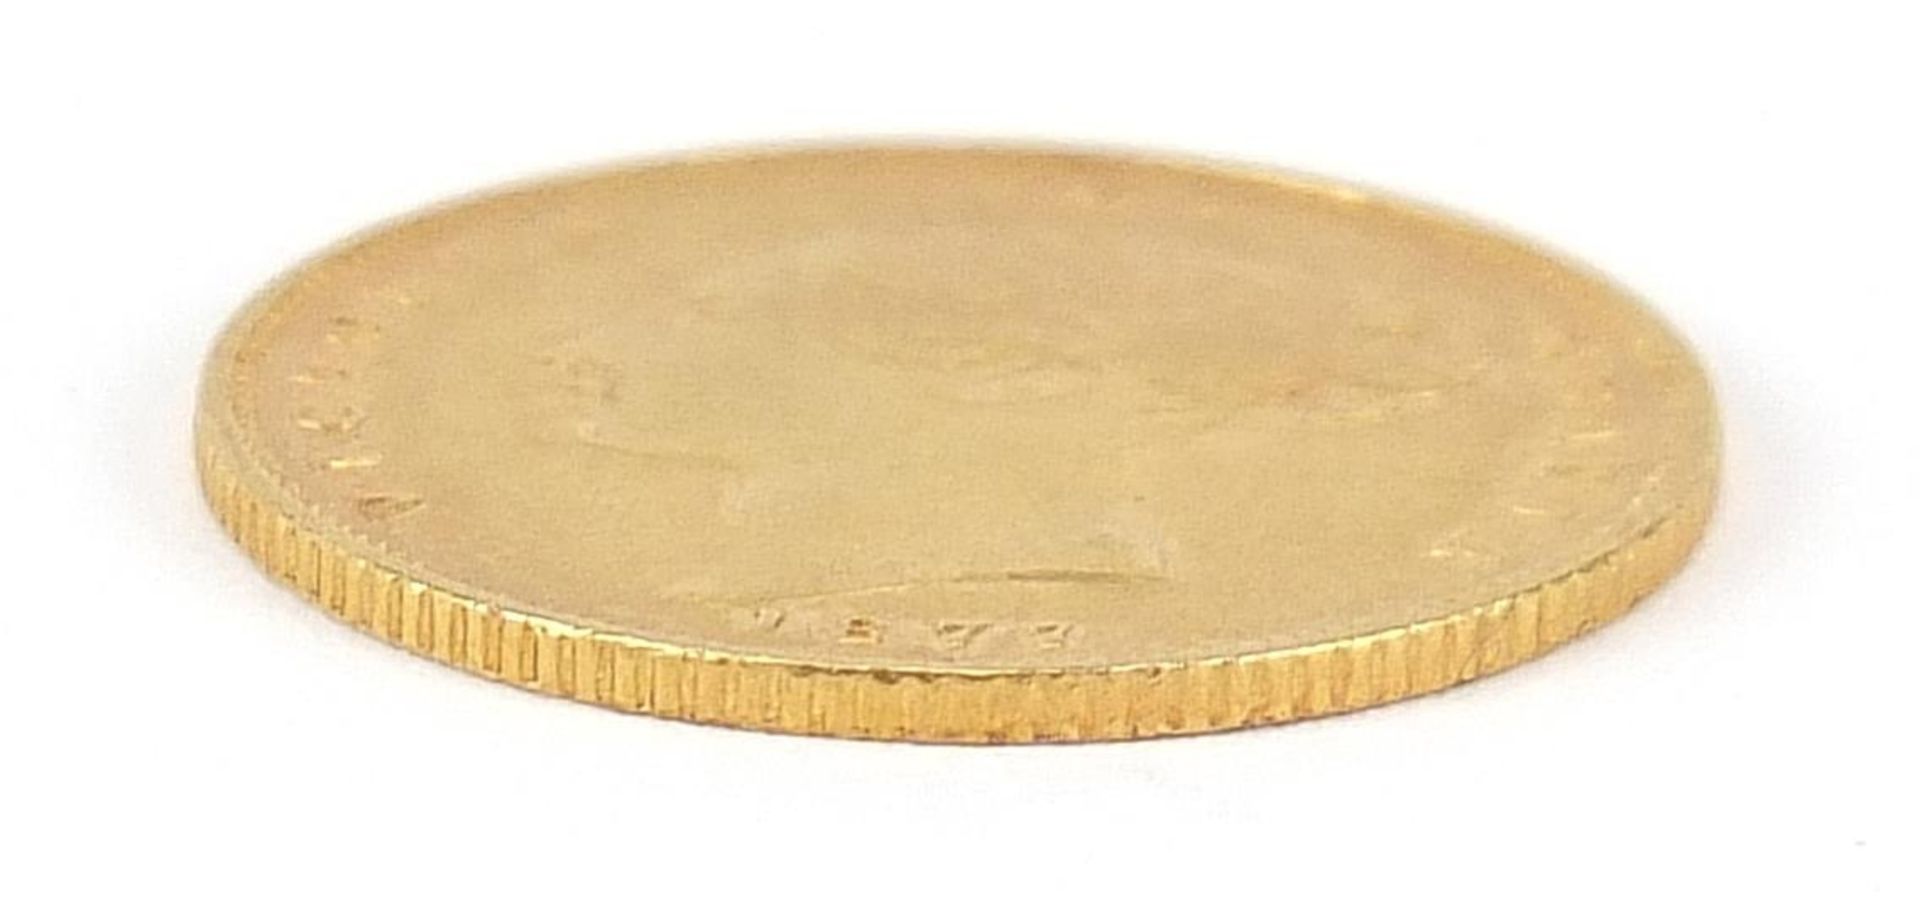 Queen Victoria Young Head 1877 gold shield back half sovereign - this lot is sold without buyer's - Image 3 of 3